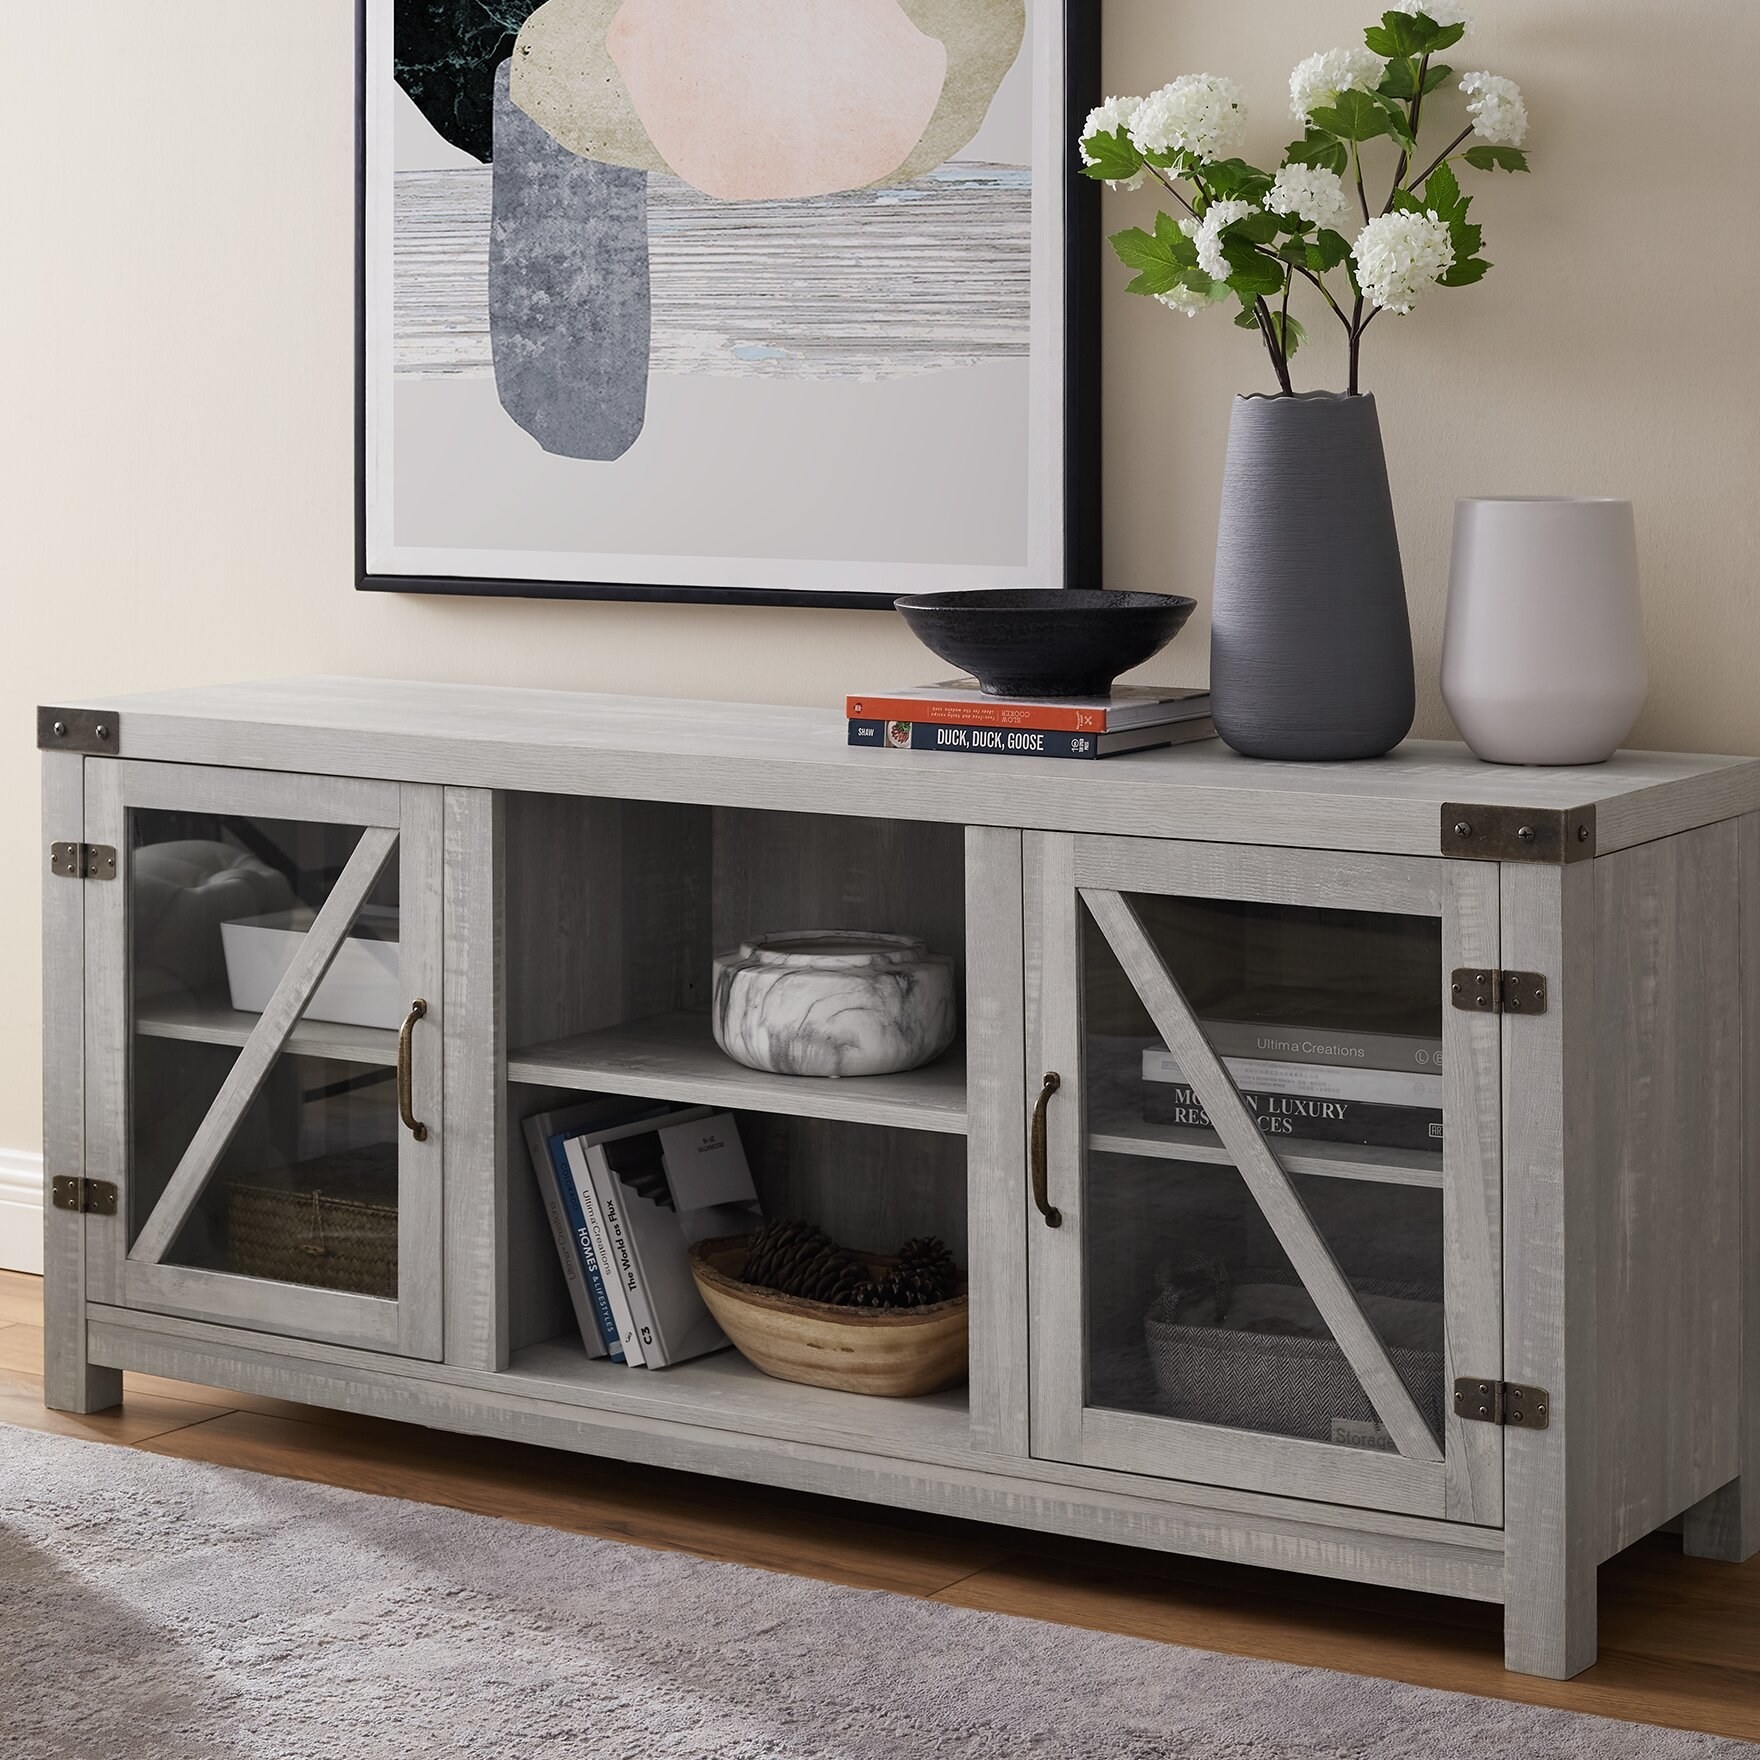 the light gray tv stand with books in each of the cupboards, vases on top, and two decorative bowls in the open center